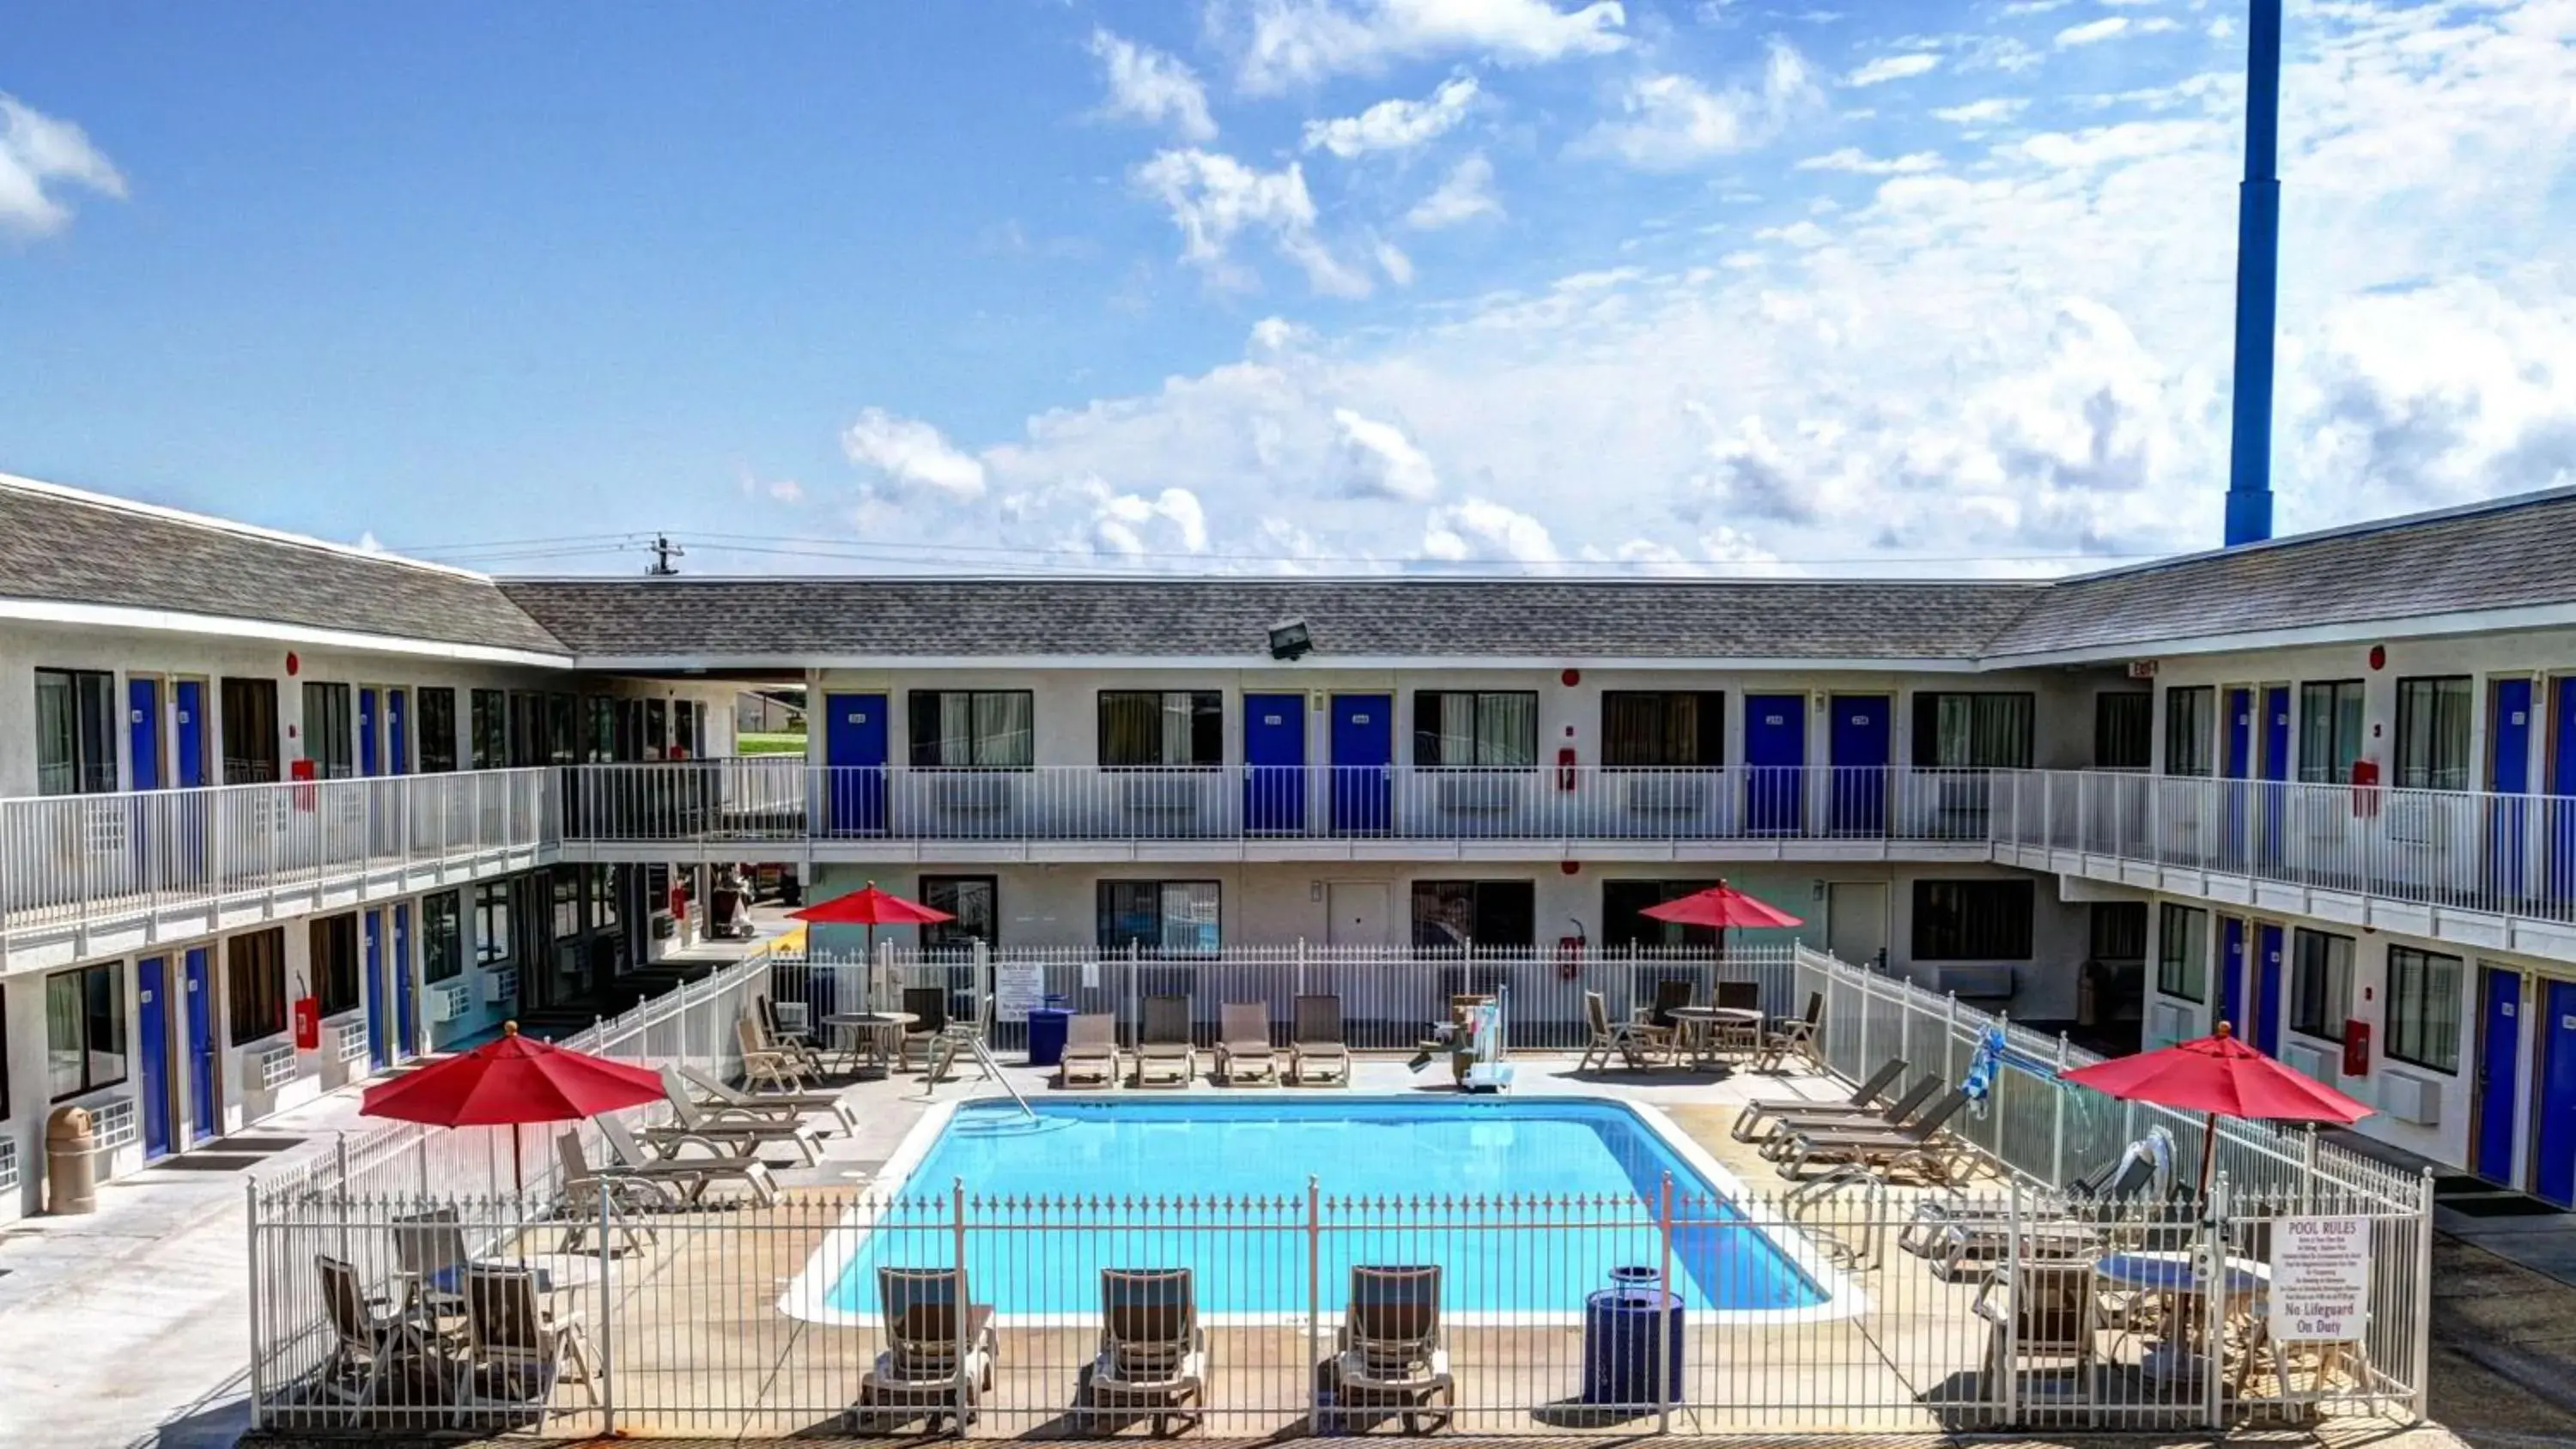 On site, Pool View in Motel 6-Slidell, LA - New Orleans